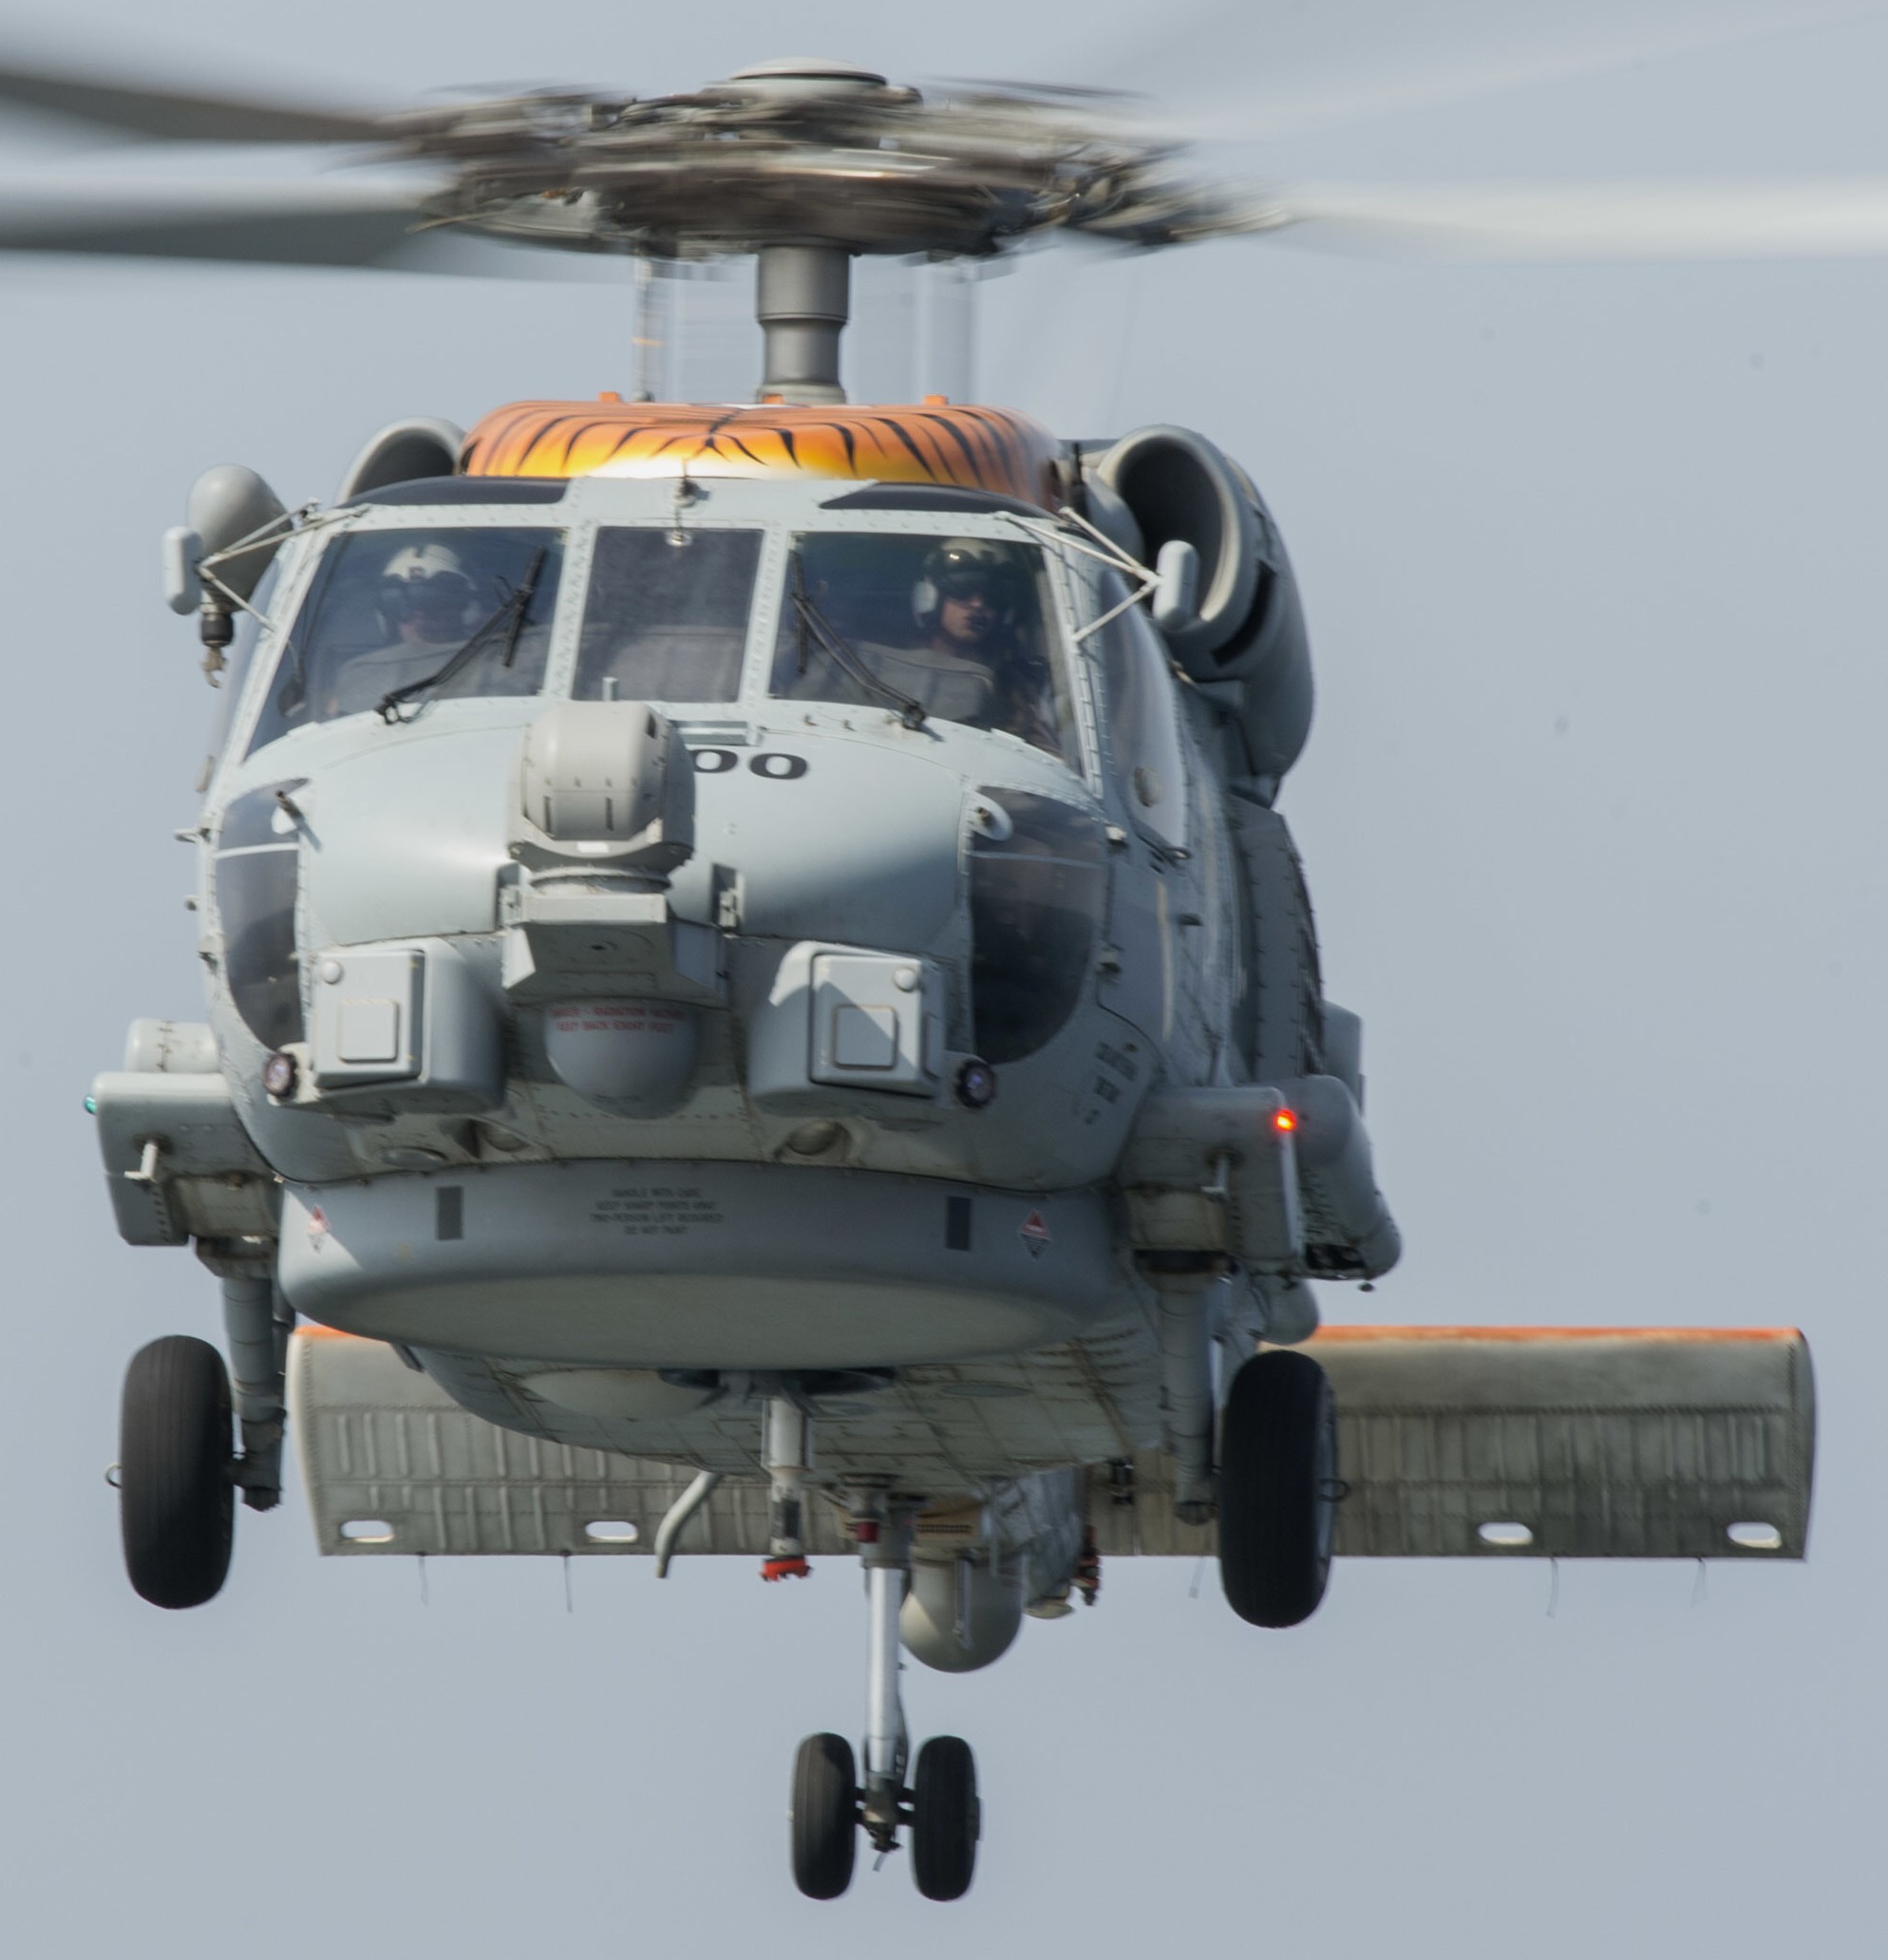 hsm-73 battlecats helicopter maritime strike squadron us navy mh-60r seahawk 2015 32